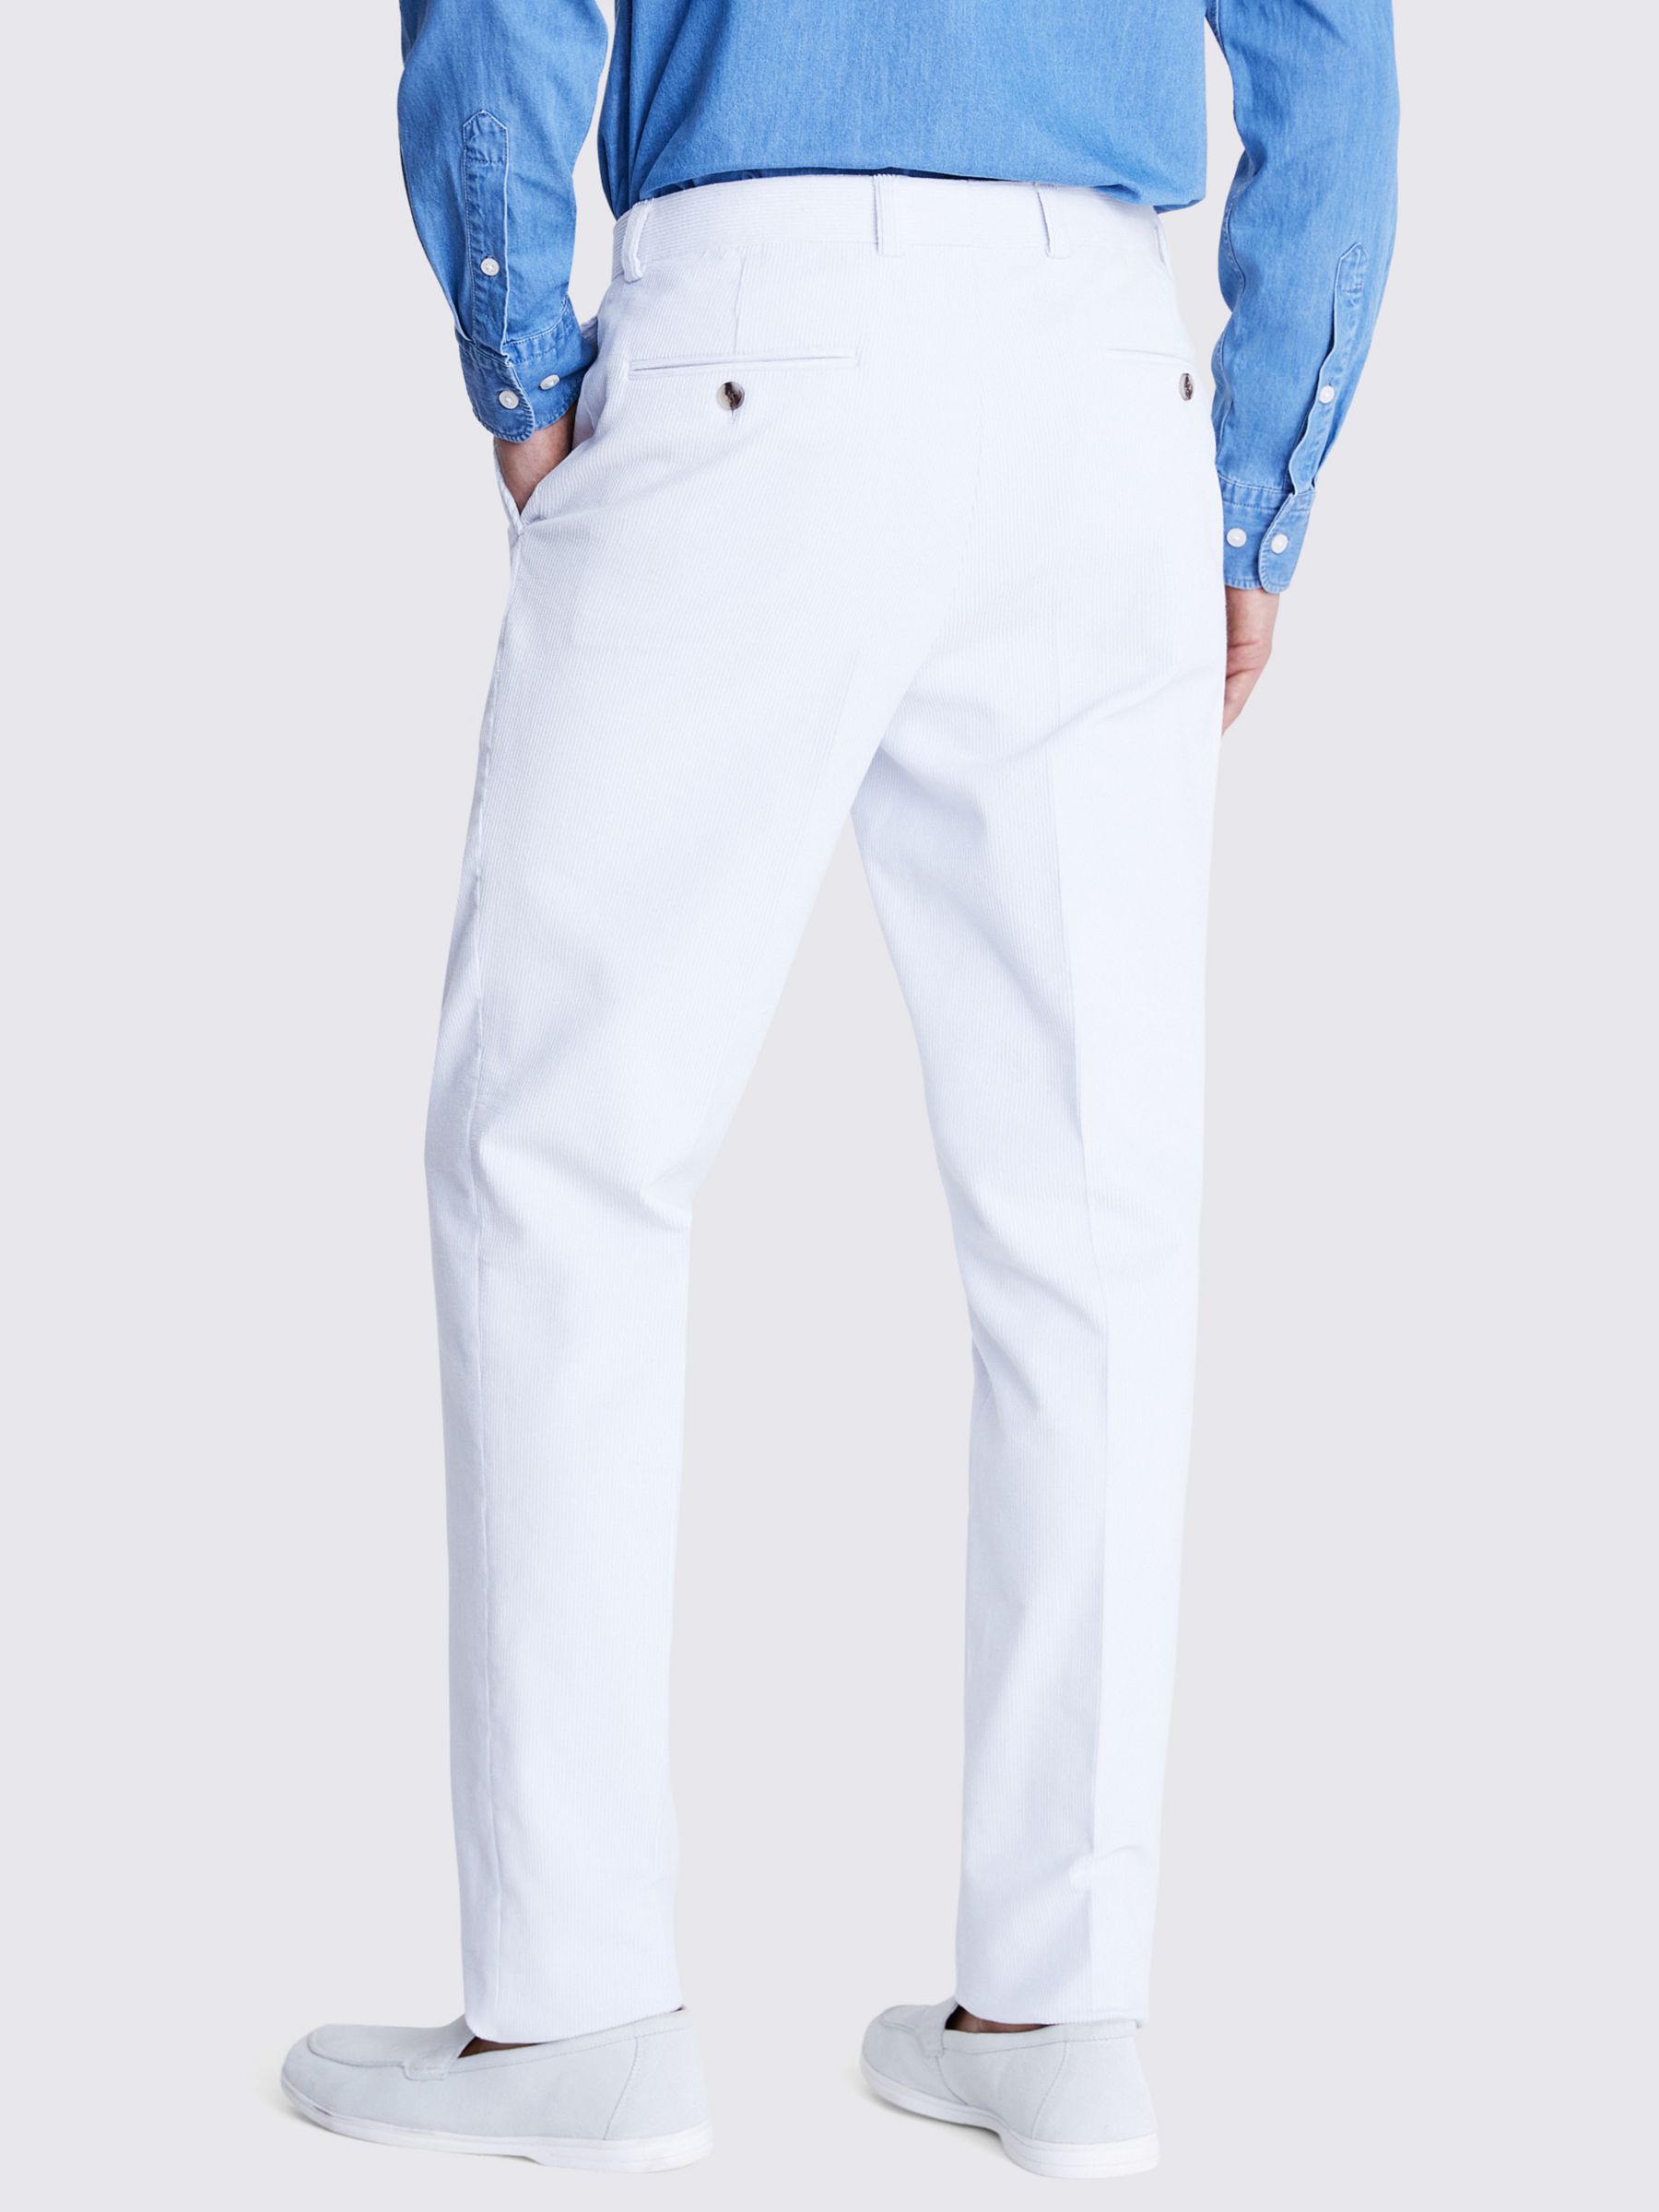 Buy Moss Tailored Fit Corduroy Suit Trousers, Light Blue Online at johnlewis.com